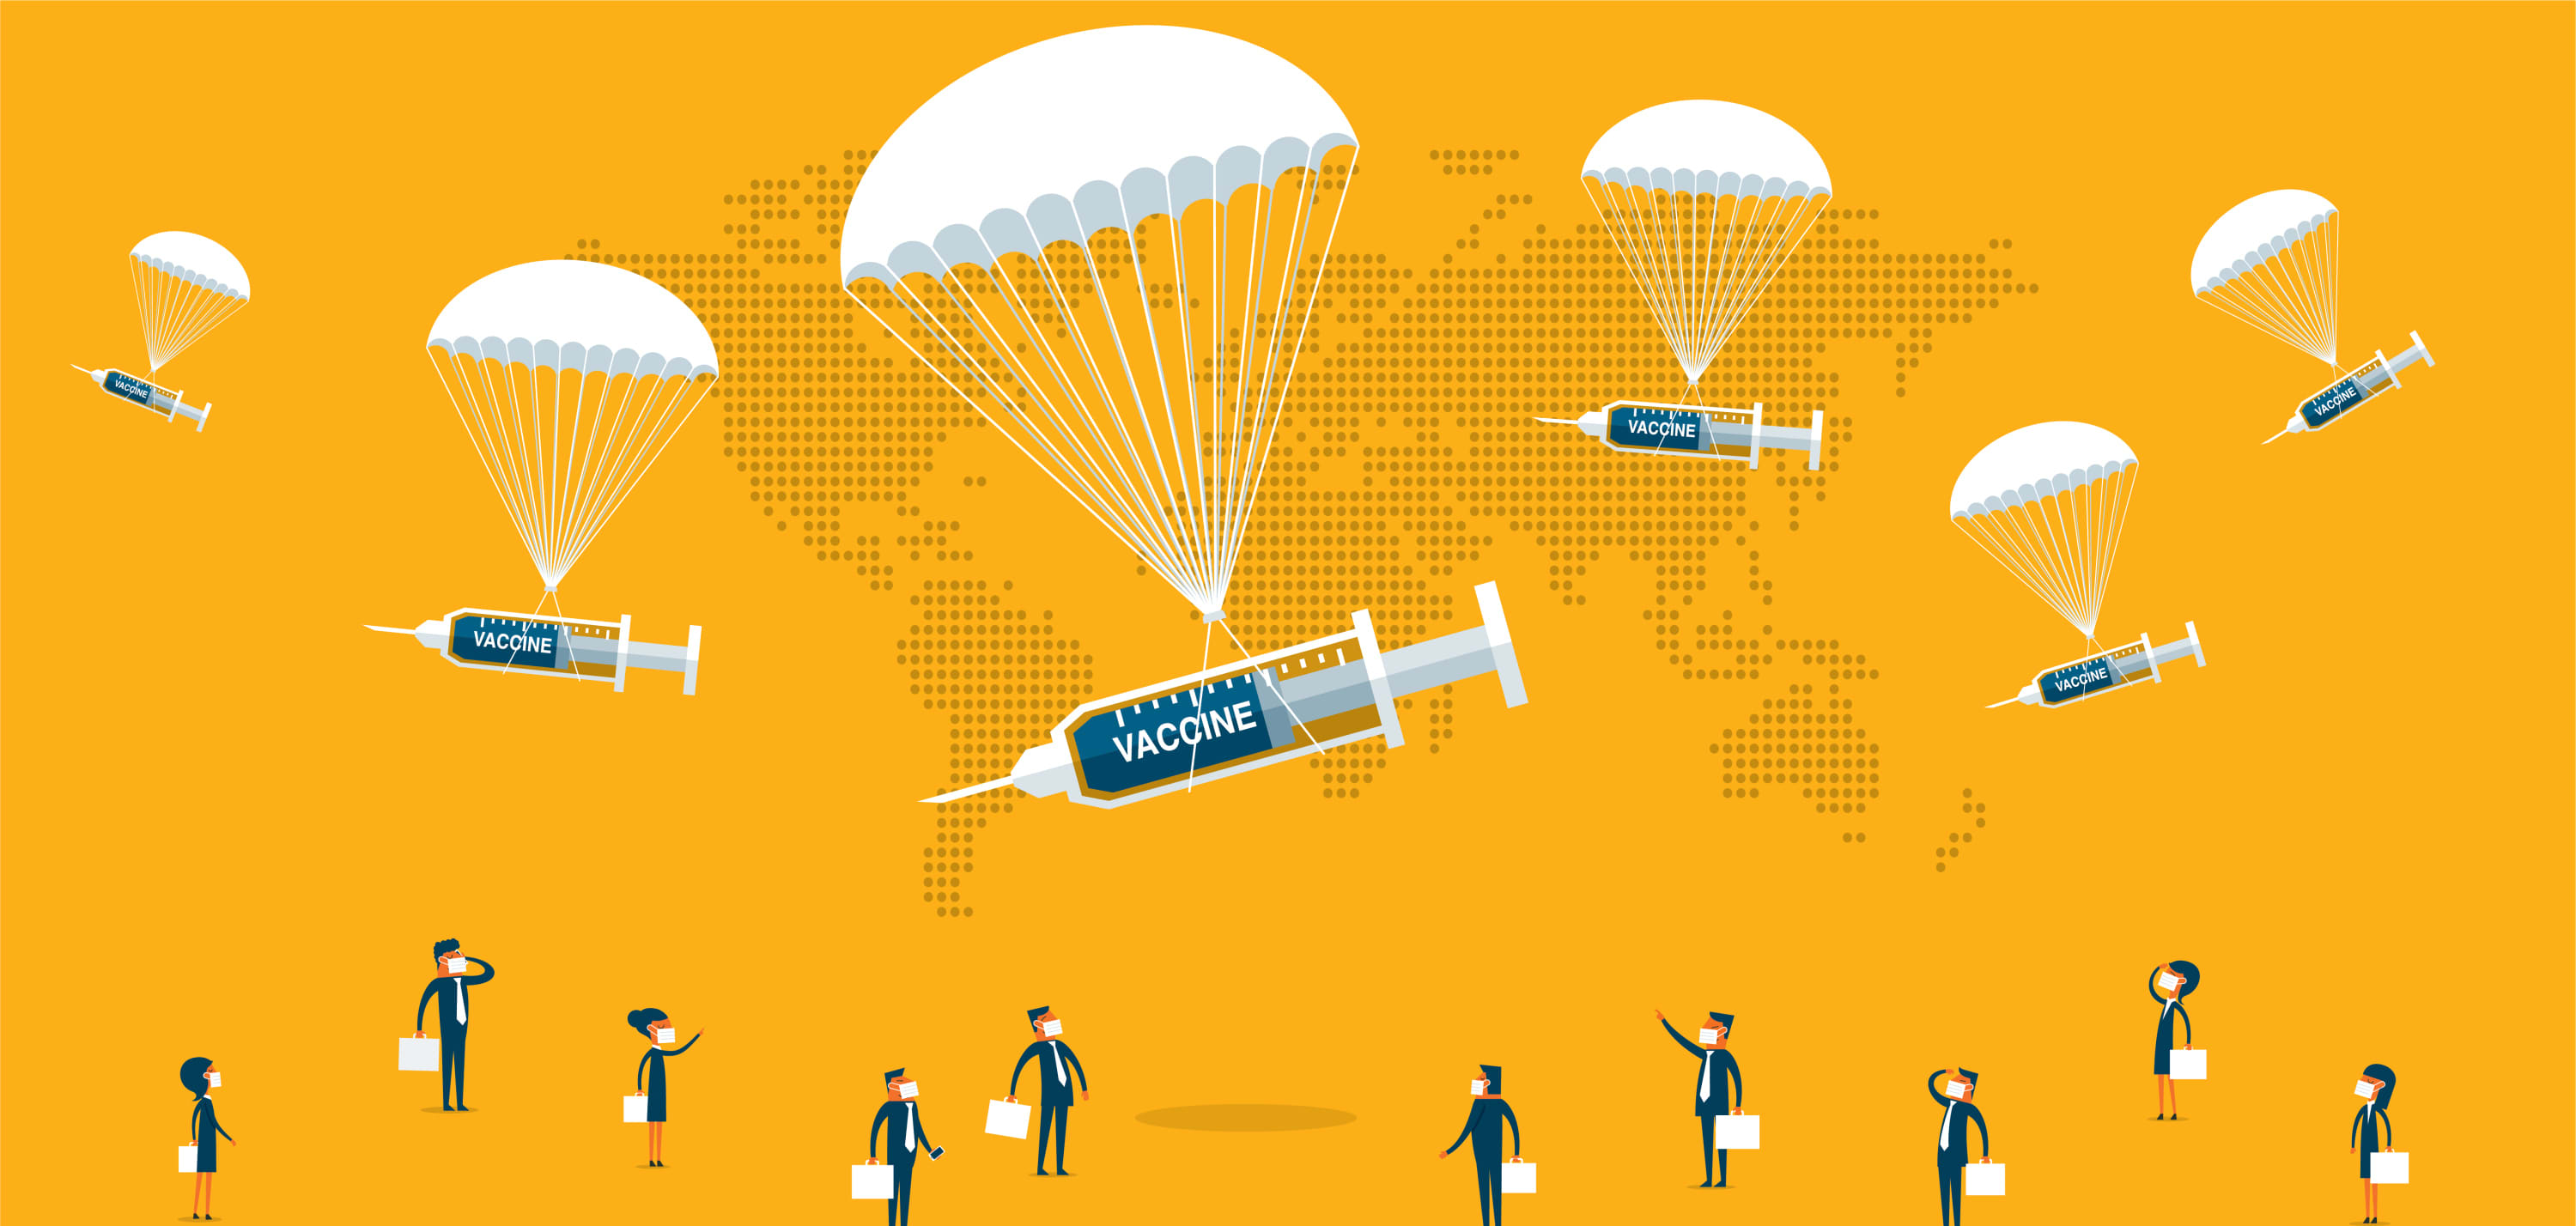 an illustration image of parachuting covid-19 vaccines dropping from the sky to recipients below